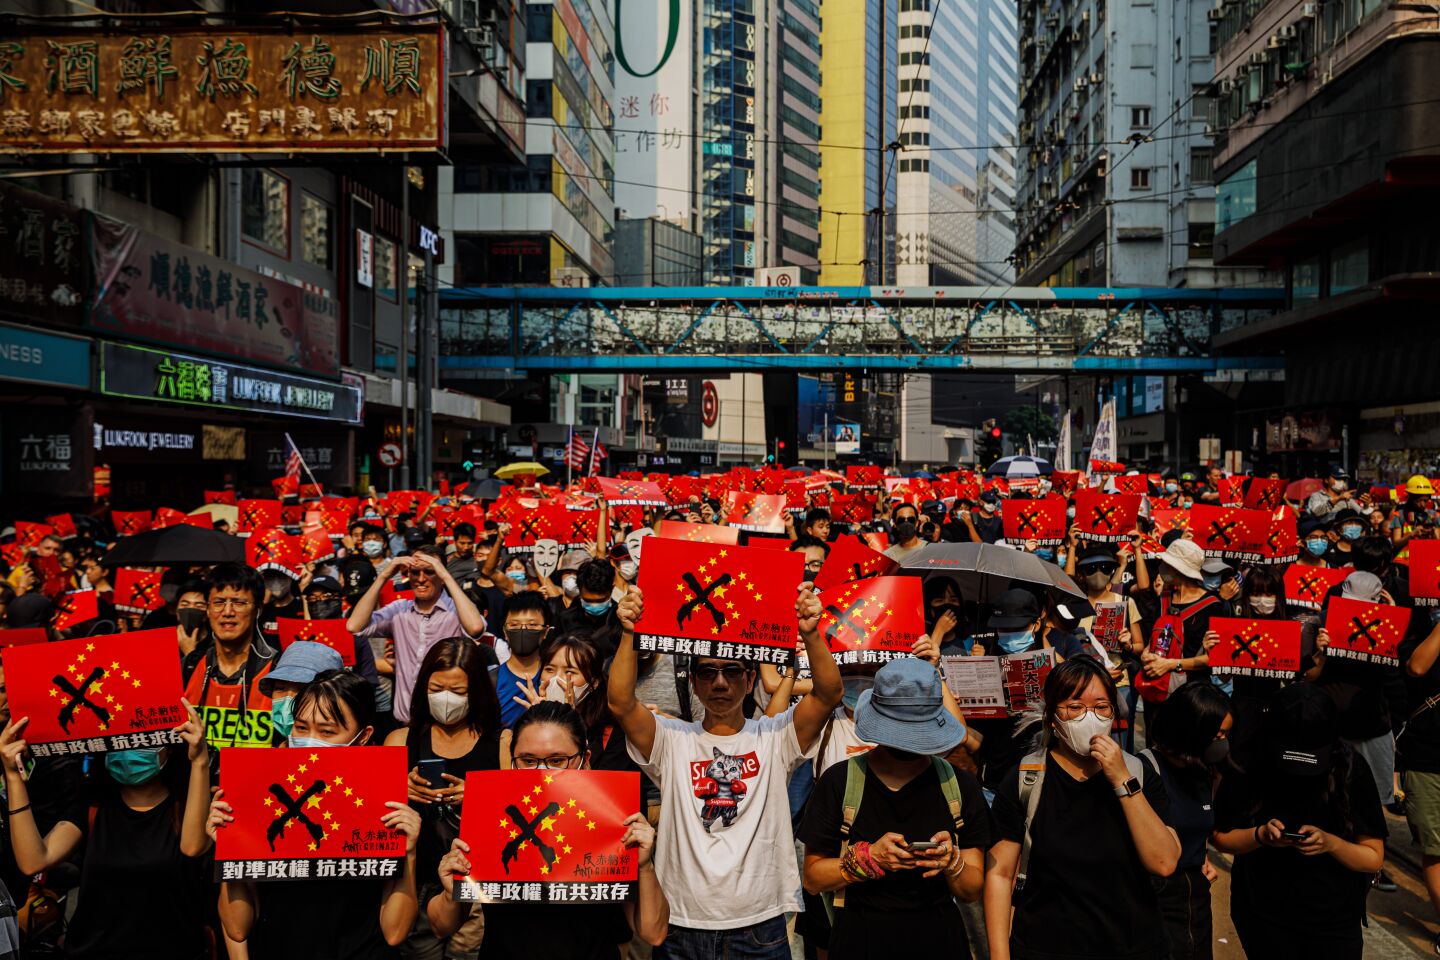 Hong Kong residents march in defiance of the upcoming China's national day, in Wan Chai area of Hong Kong, on Sept. 29, 2019.